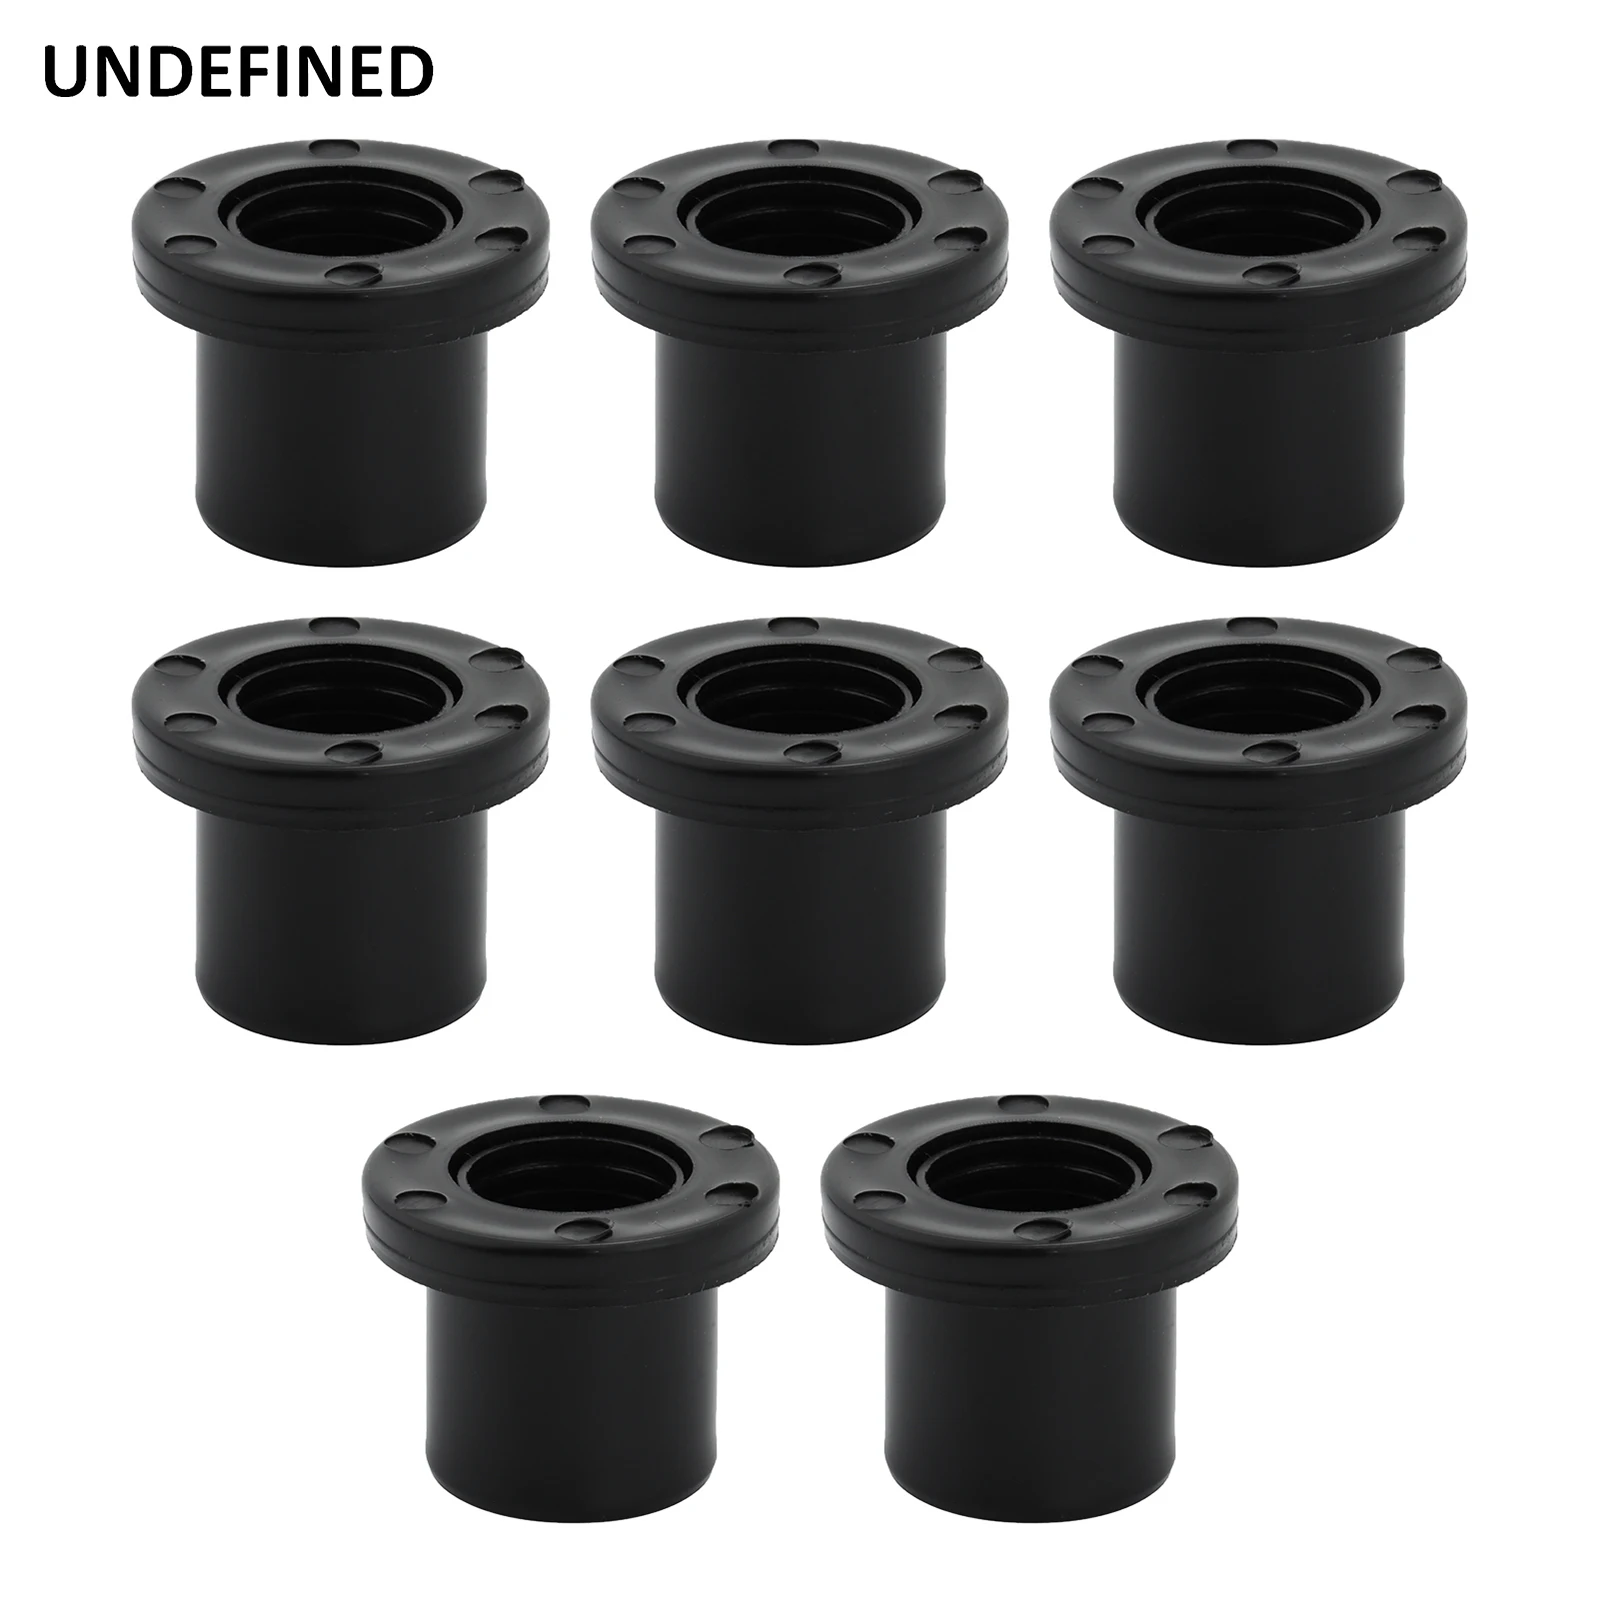 REAR SUSPENSION SHOCK ABSORBER BUSHINGS Fits ARCTIC CAT PROWLER 550 4X4 2009